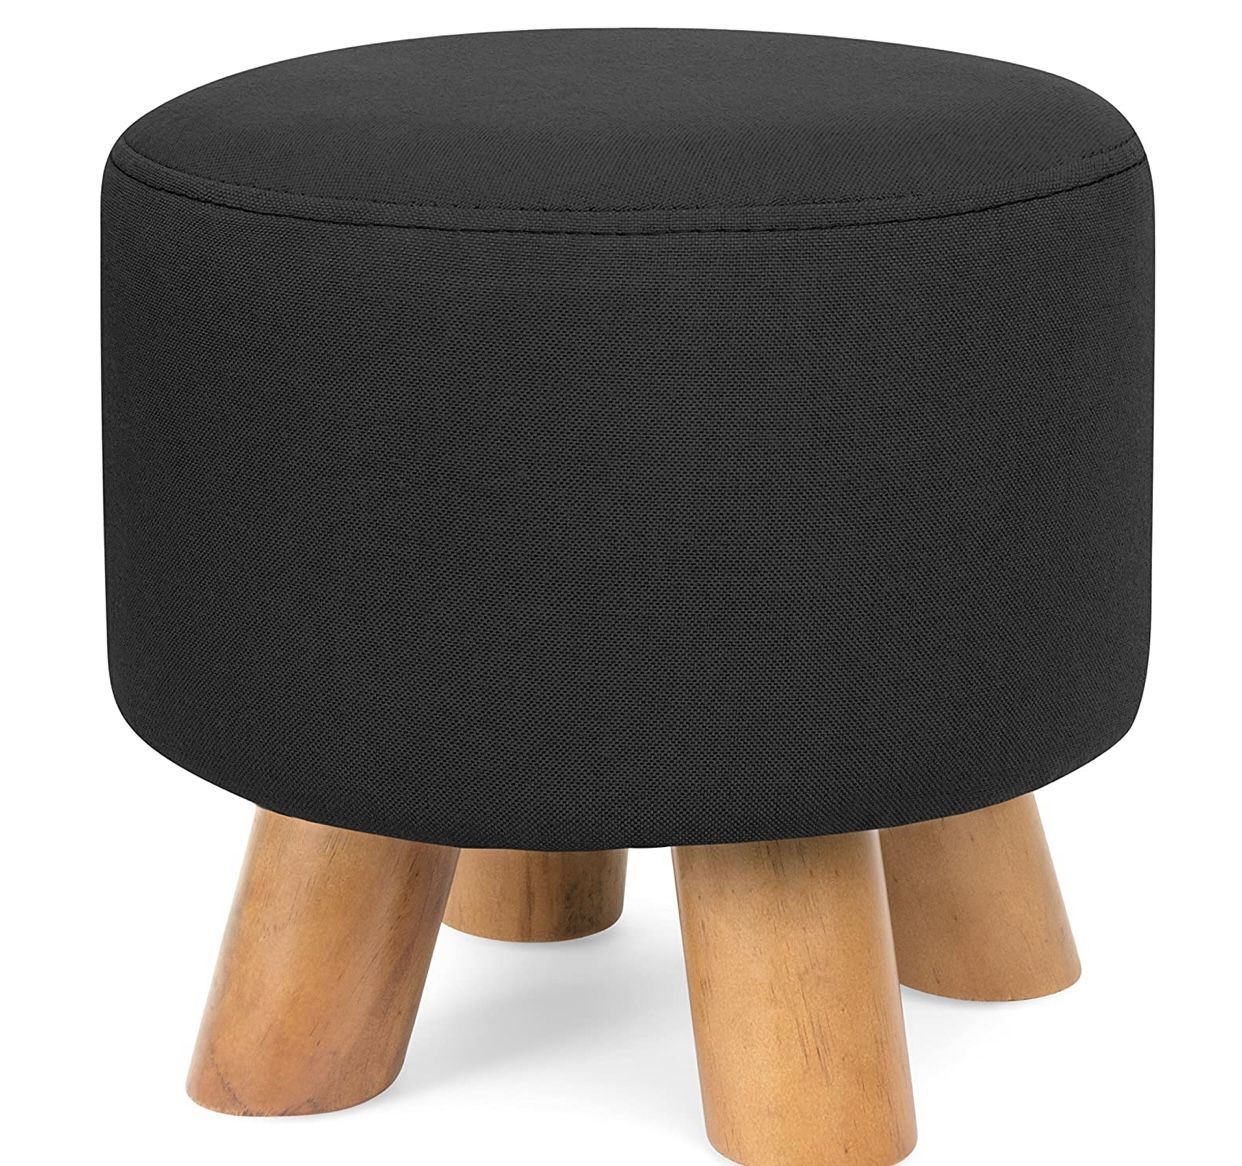 Foam Padded Pouf Ottoman Footrest Stool w/Removable Linen Cover and Non-Skid Wooden Legs,